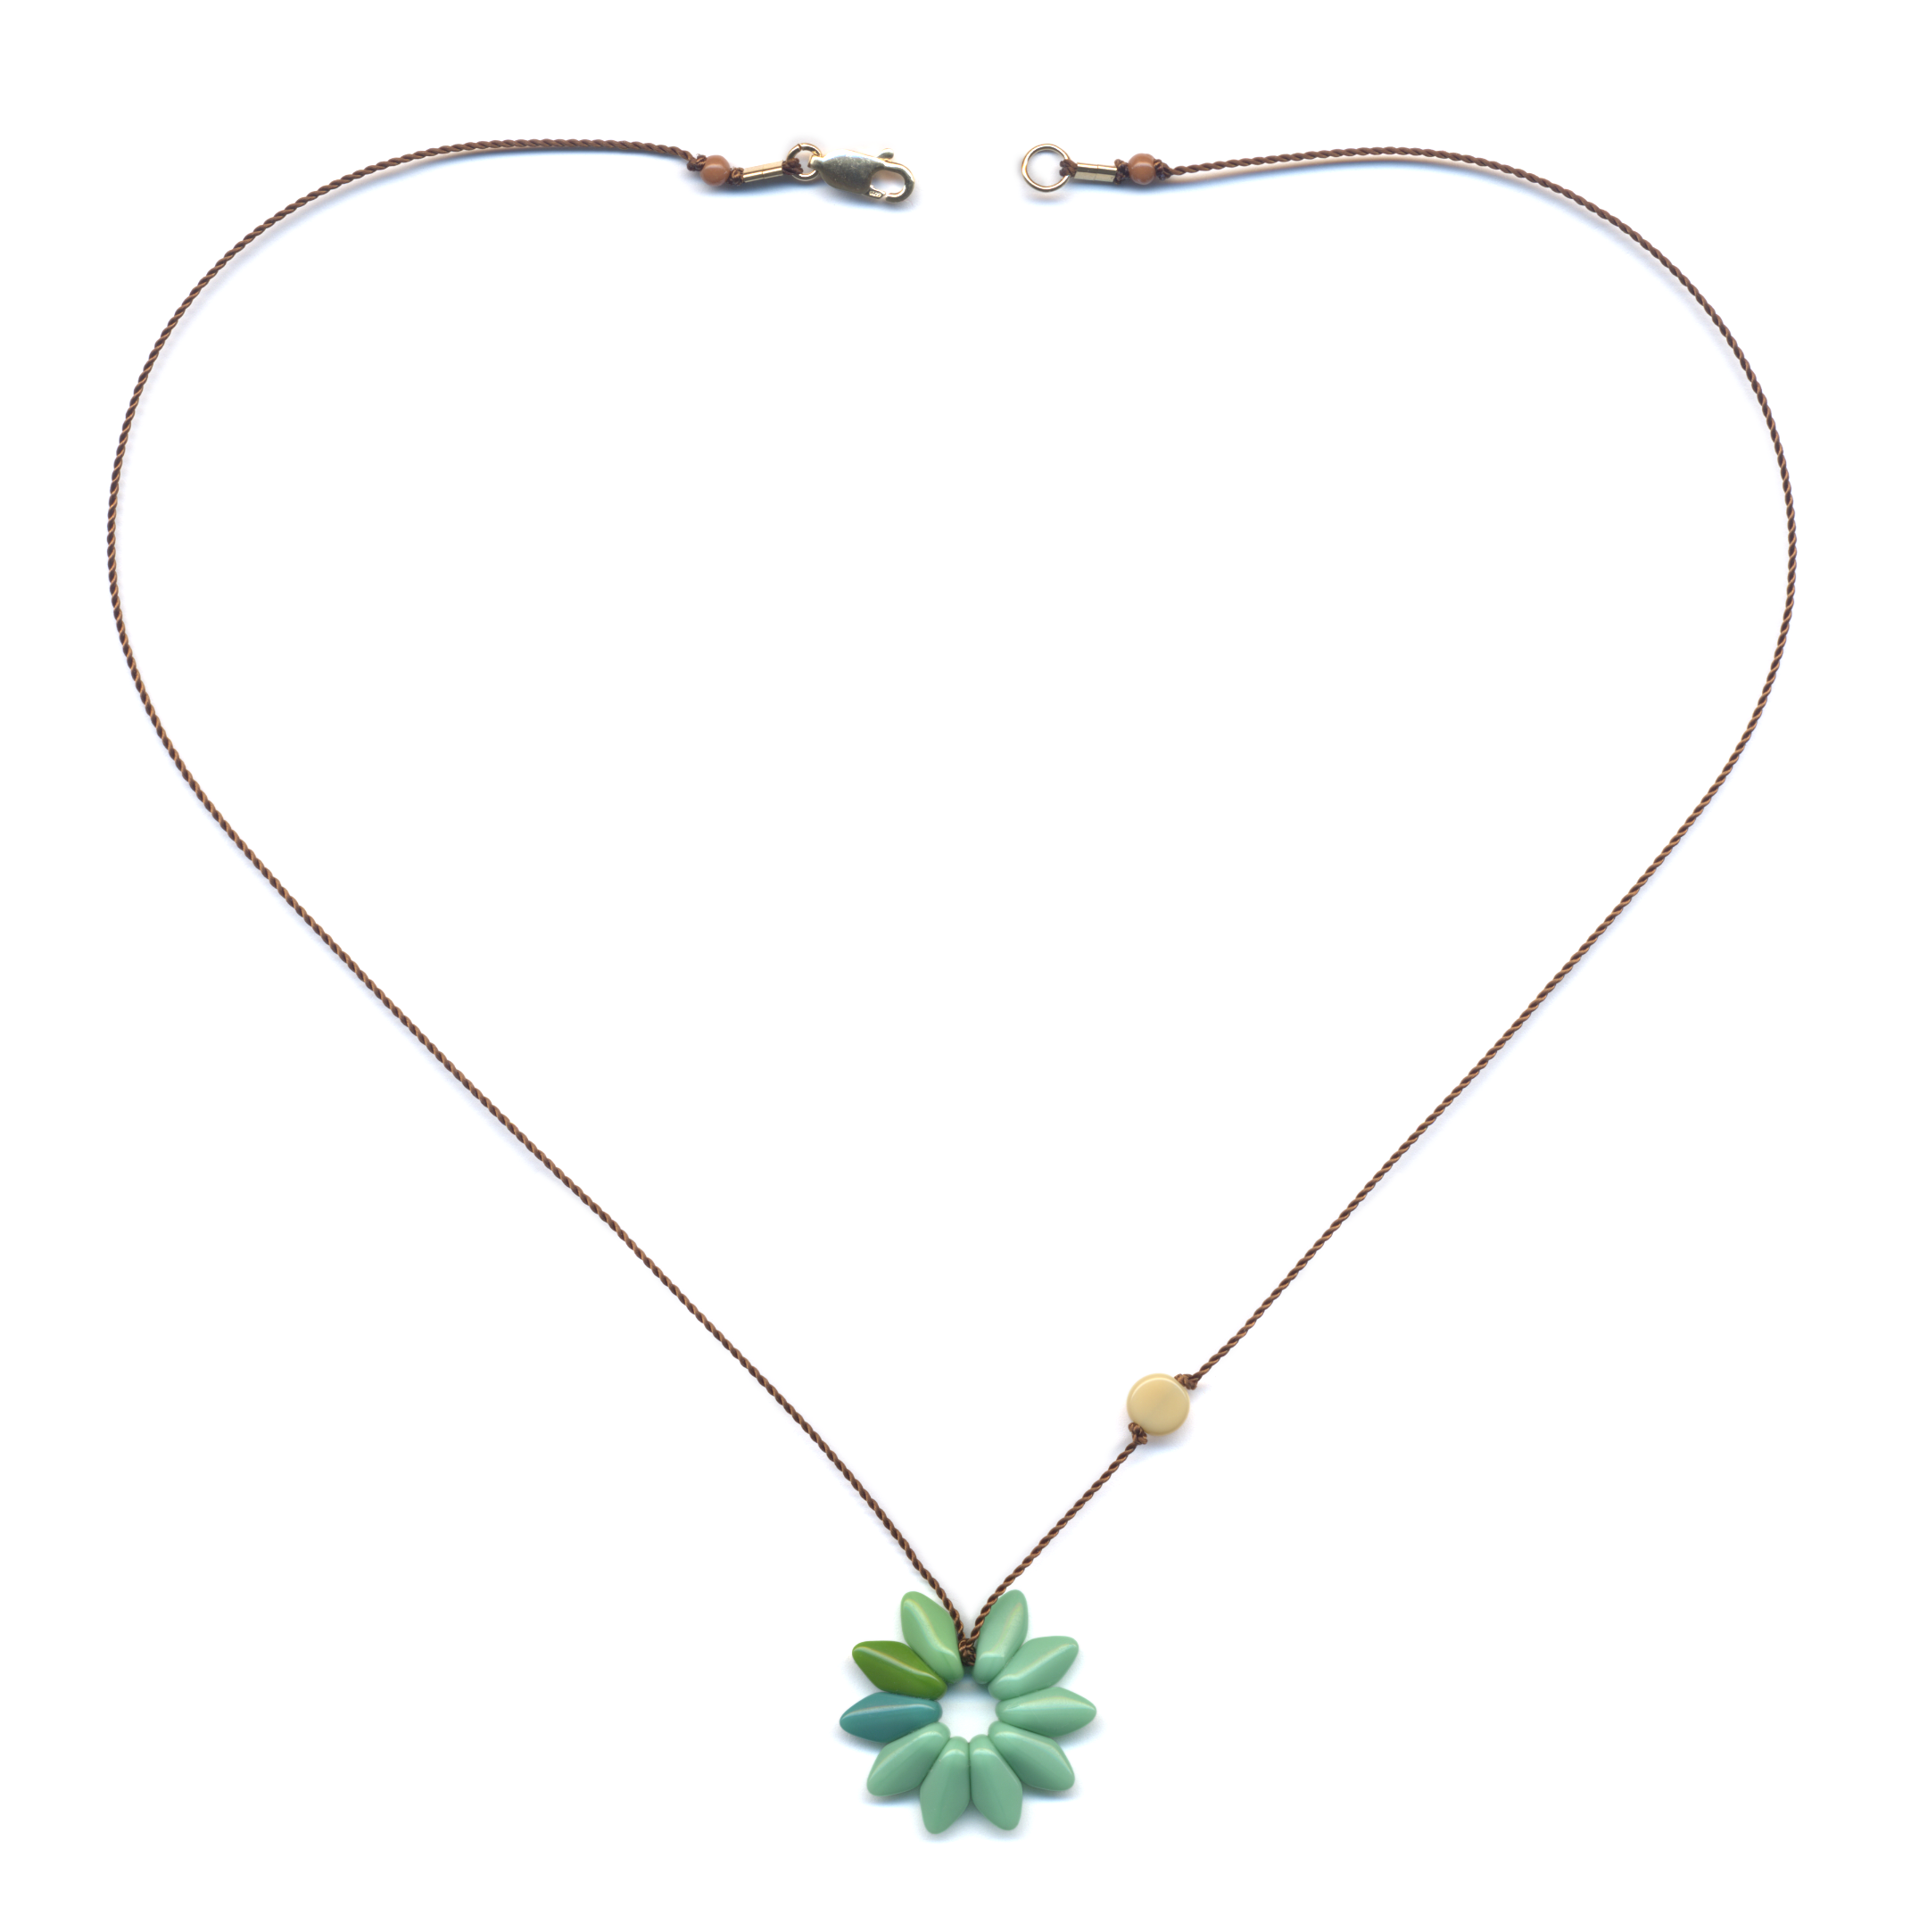 N2062 Small Green Flower Necklace